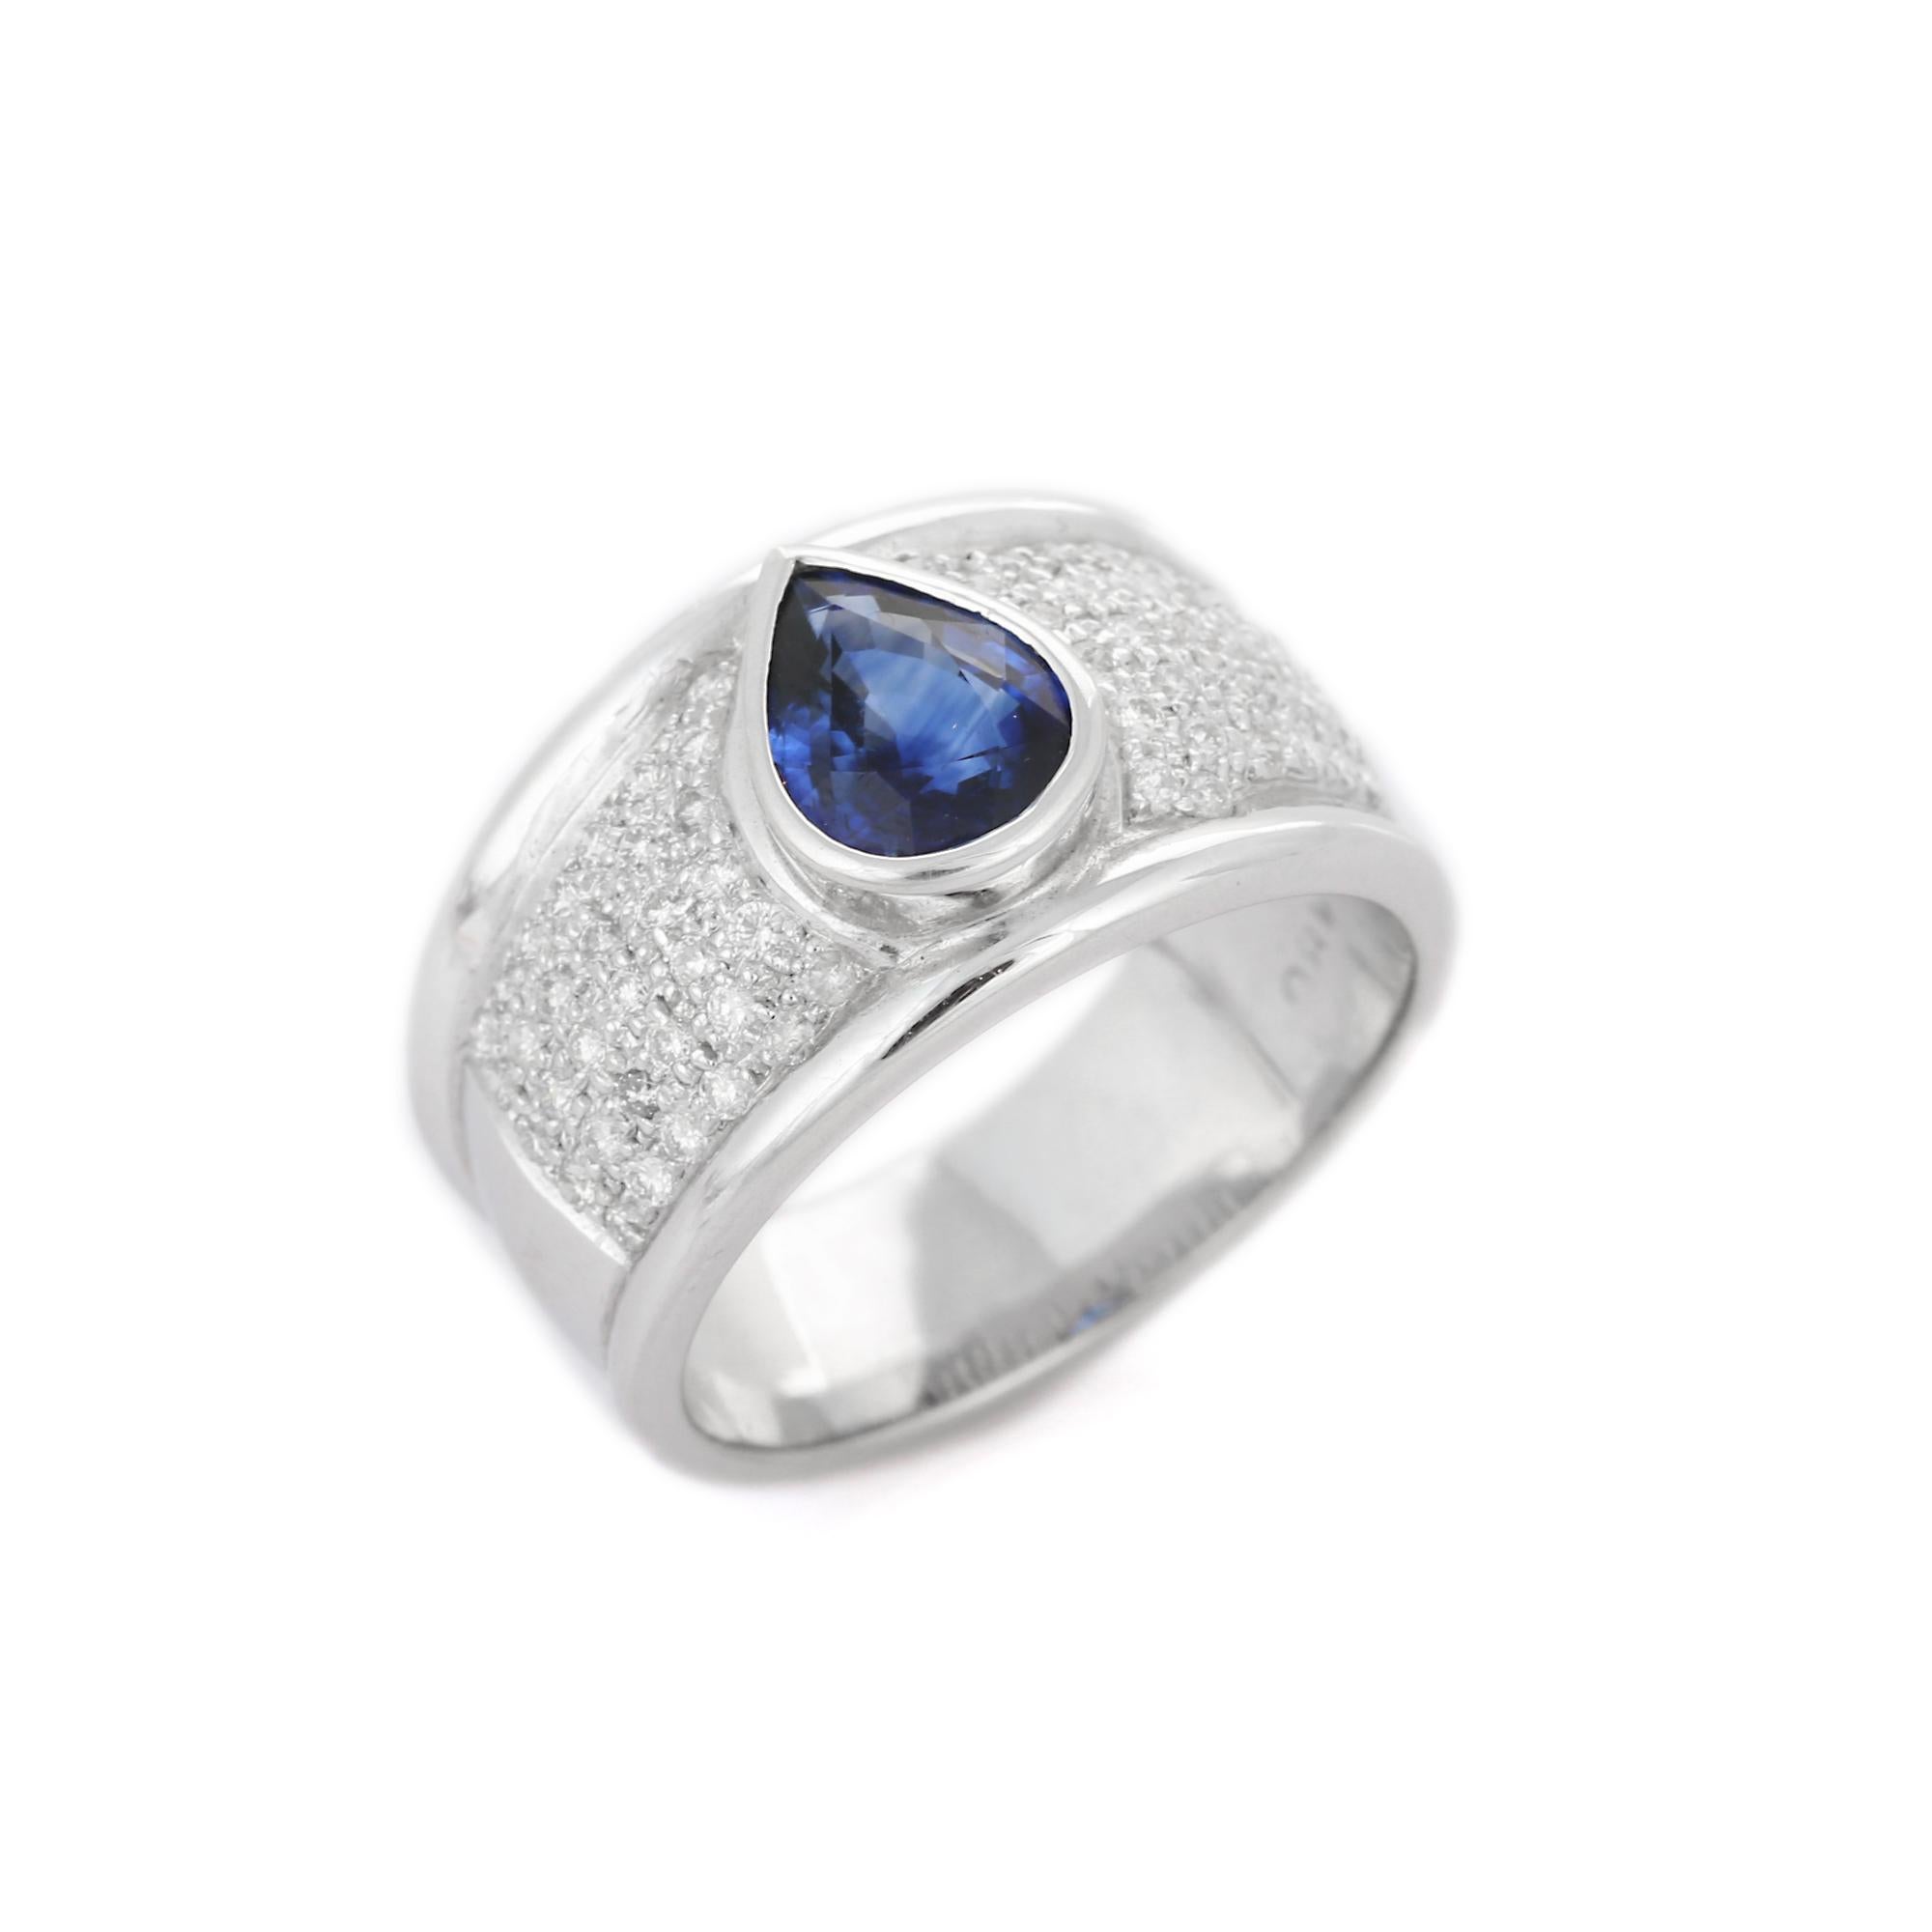 For Sale:  Glamarous 2.1 Ct Blue Sapphire Cocktail Ring in 18K White Gold with Diamonds 5